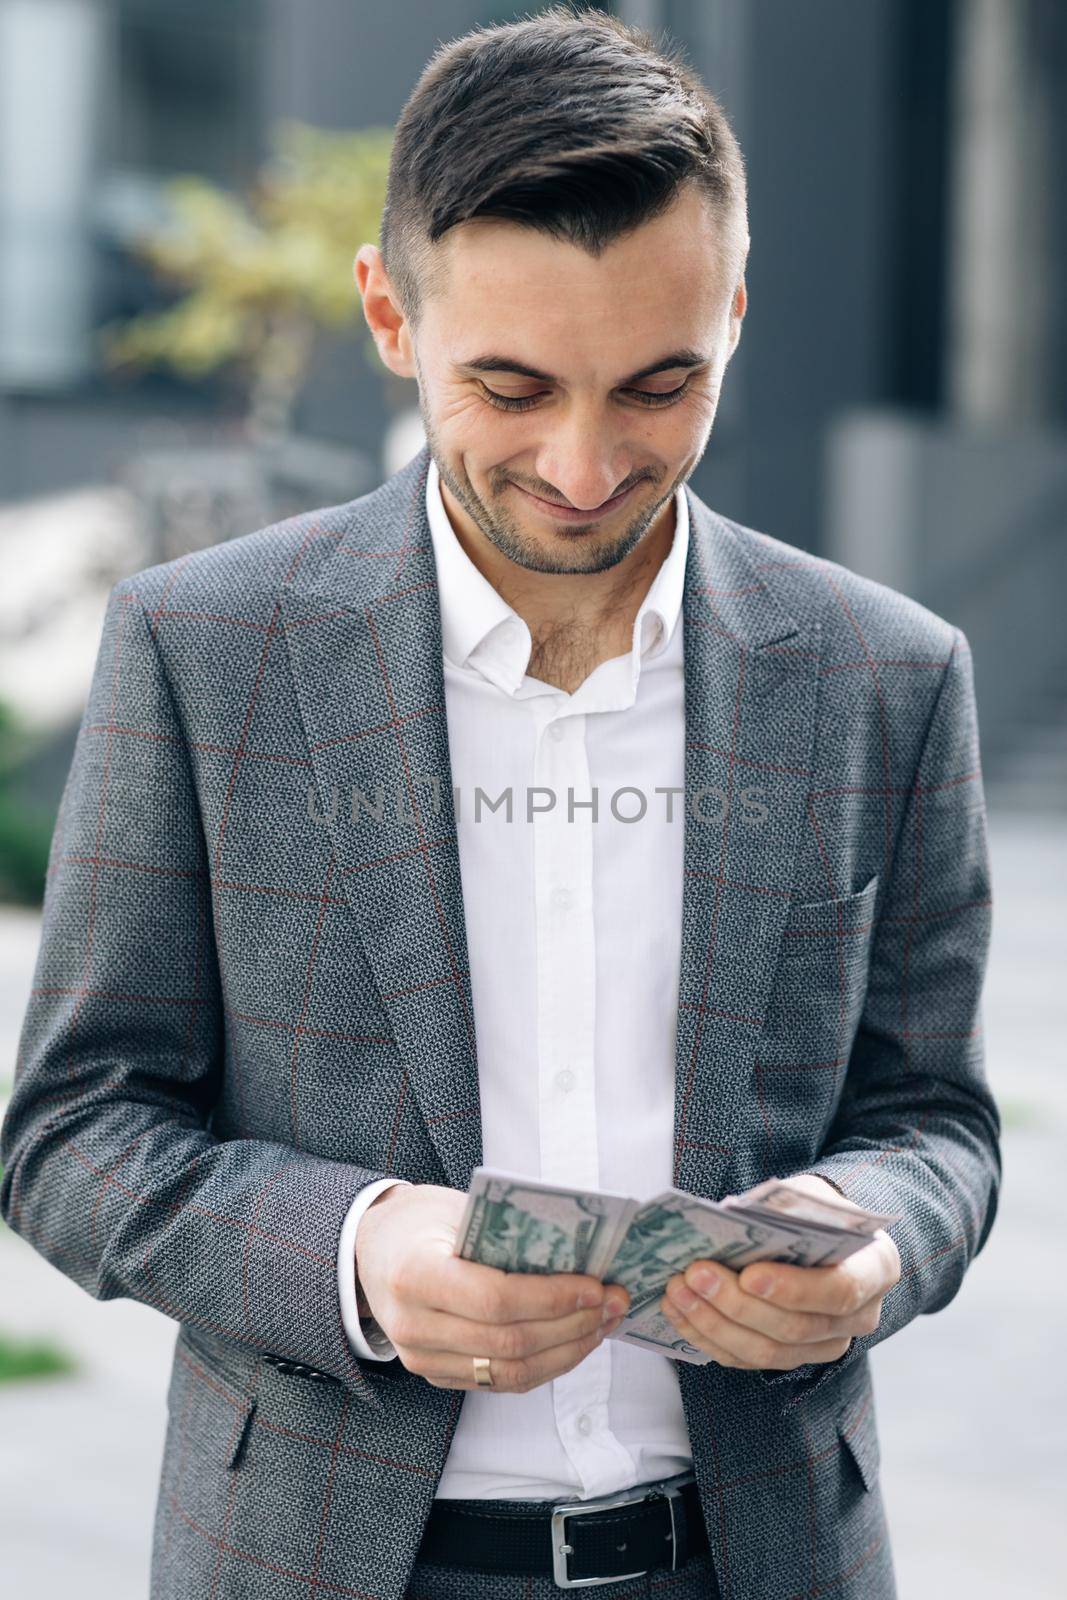 Handsome Rich Man Wearing Stylish Suit Counting Money Standing in the Street Near Office Building.